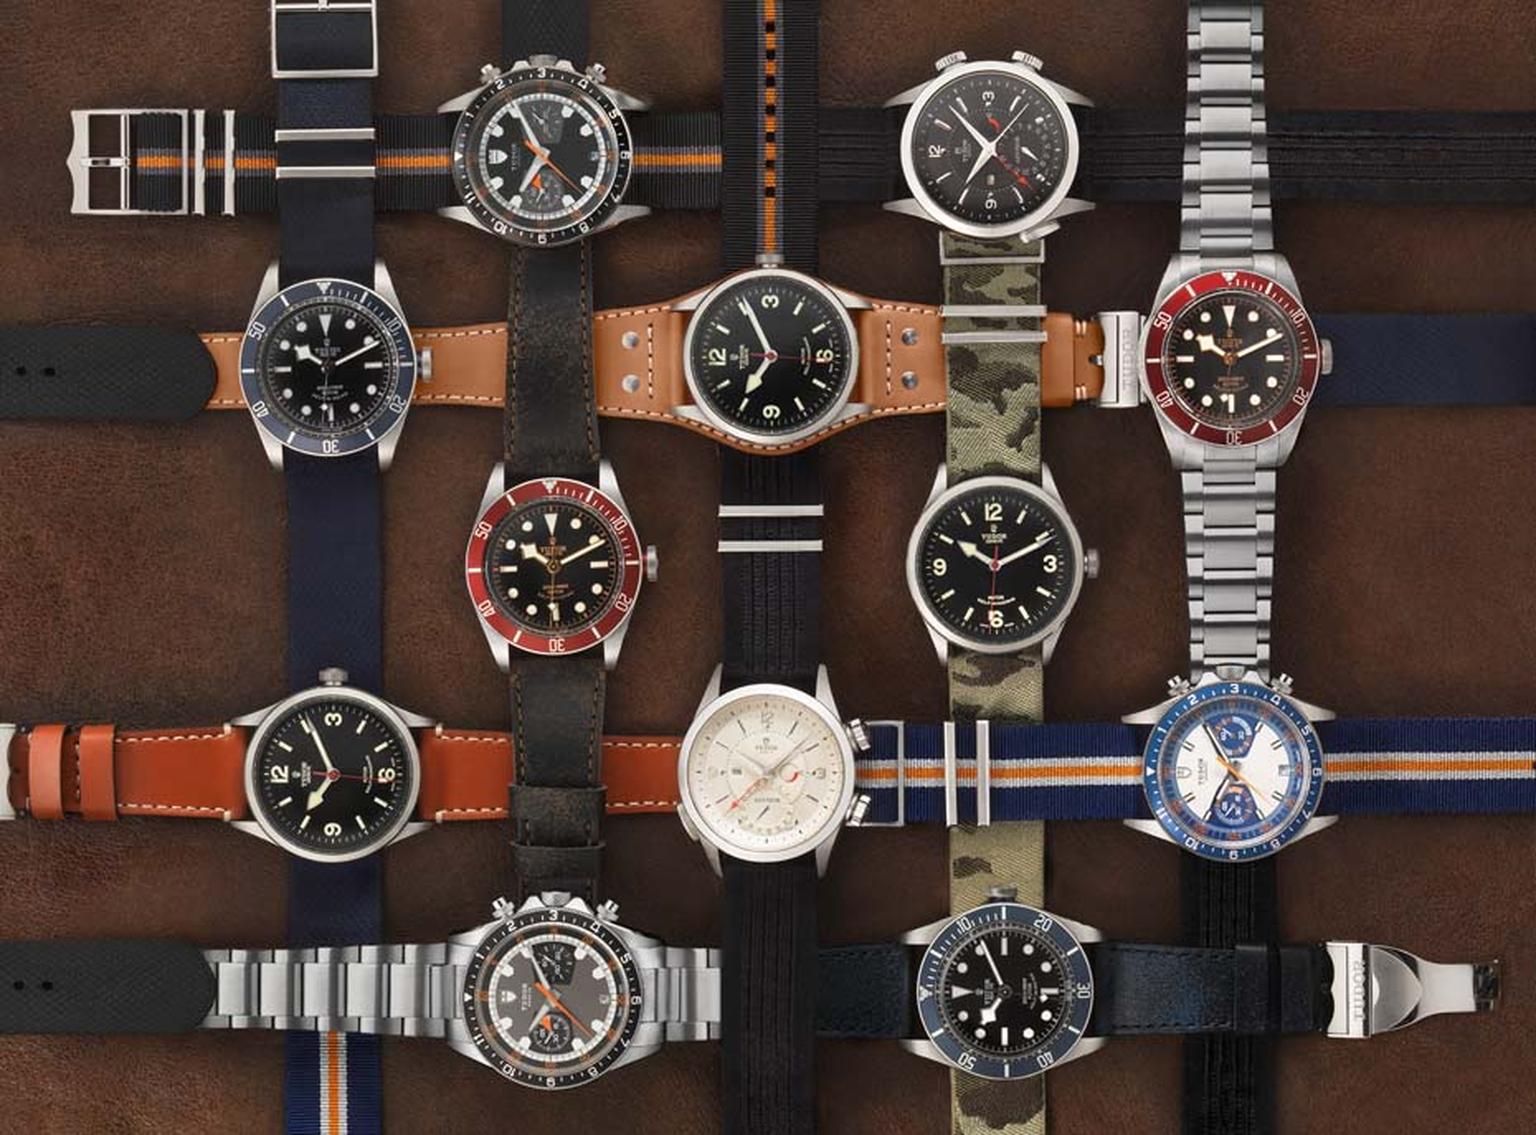 A wide range of models from the Tudor family of watches will be available from the 19 September 2014 in 100 stores across the country. Prices range from £1,370 and £5,440.